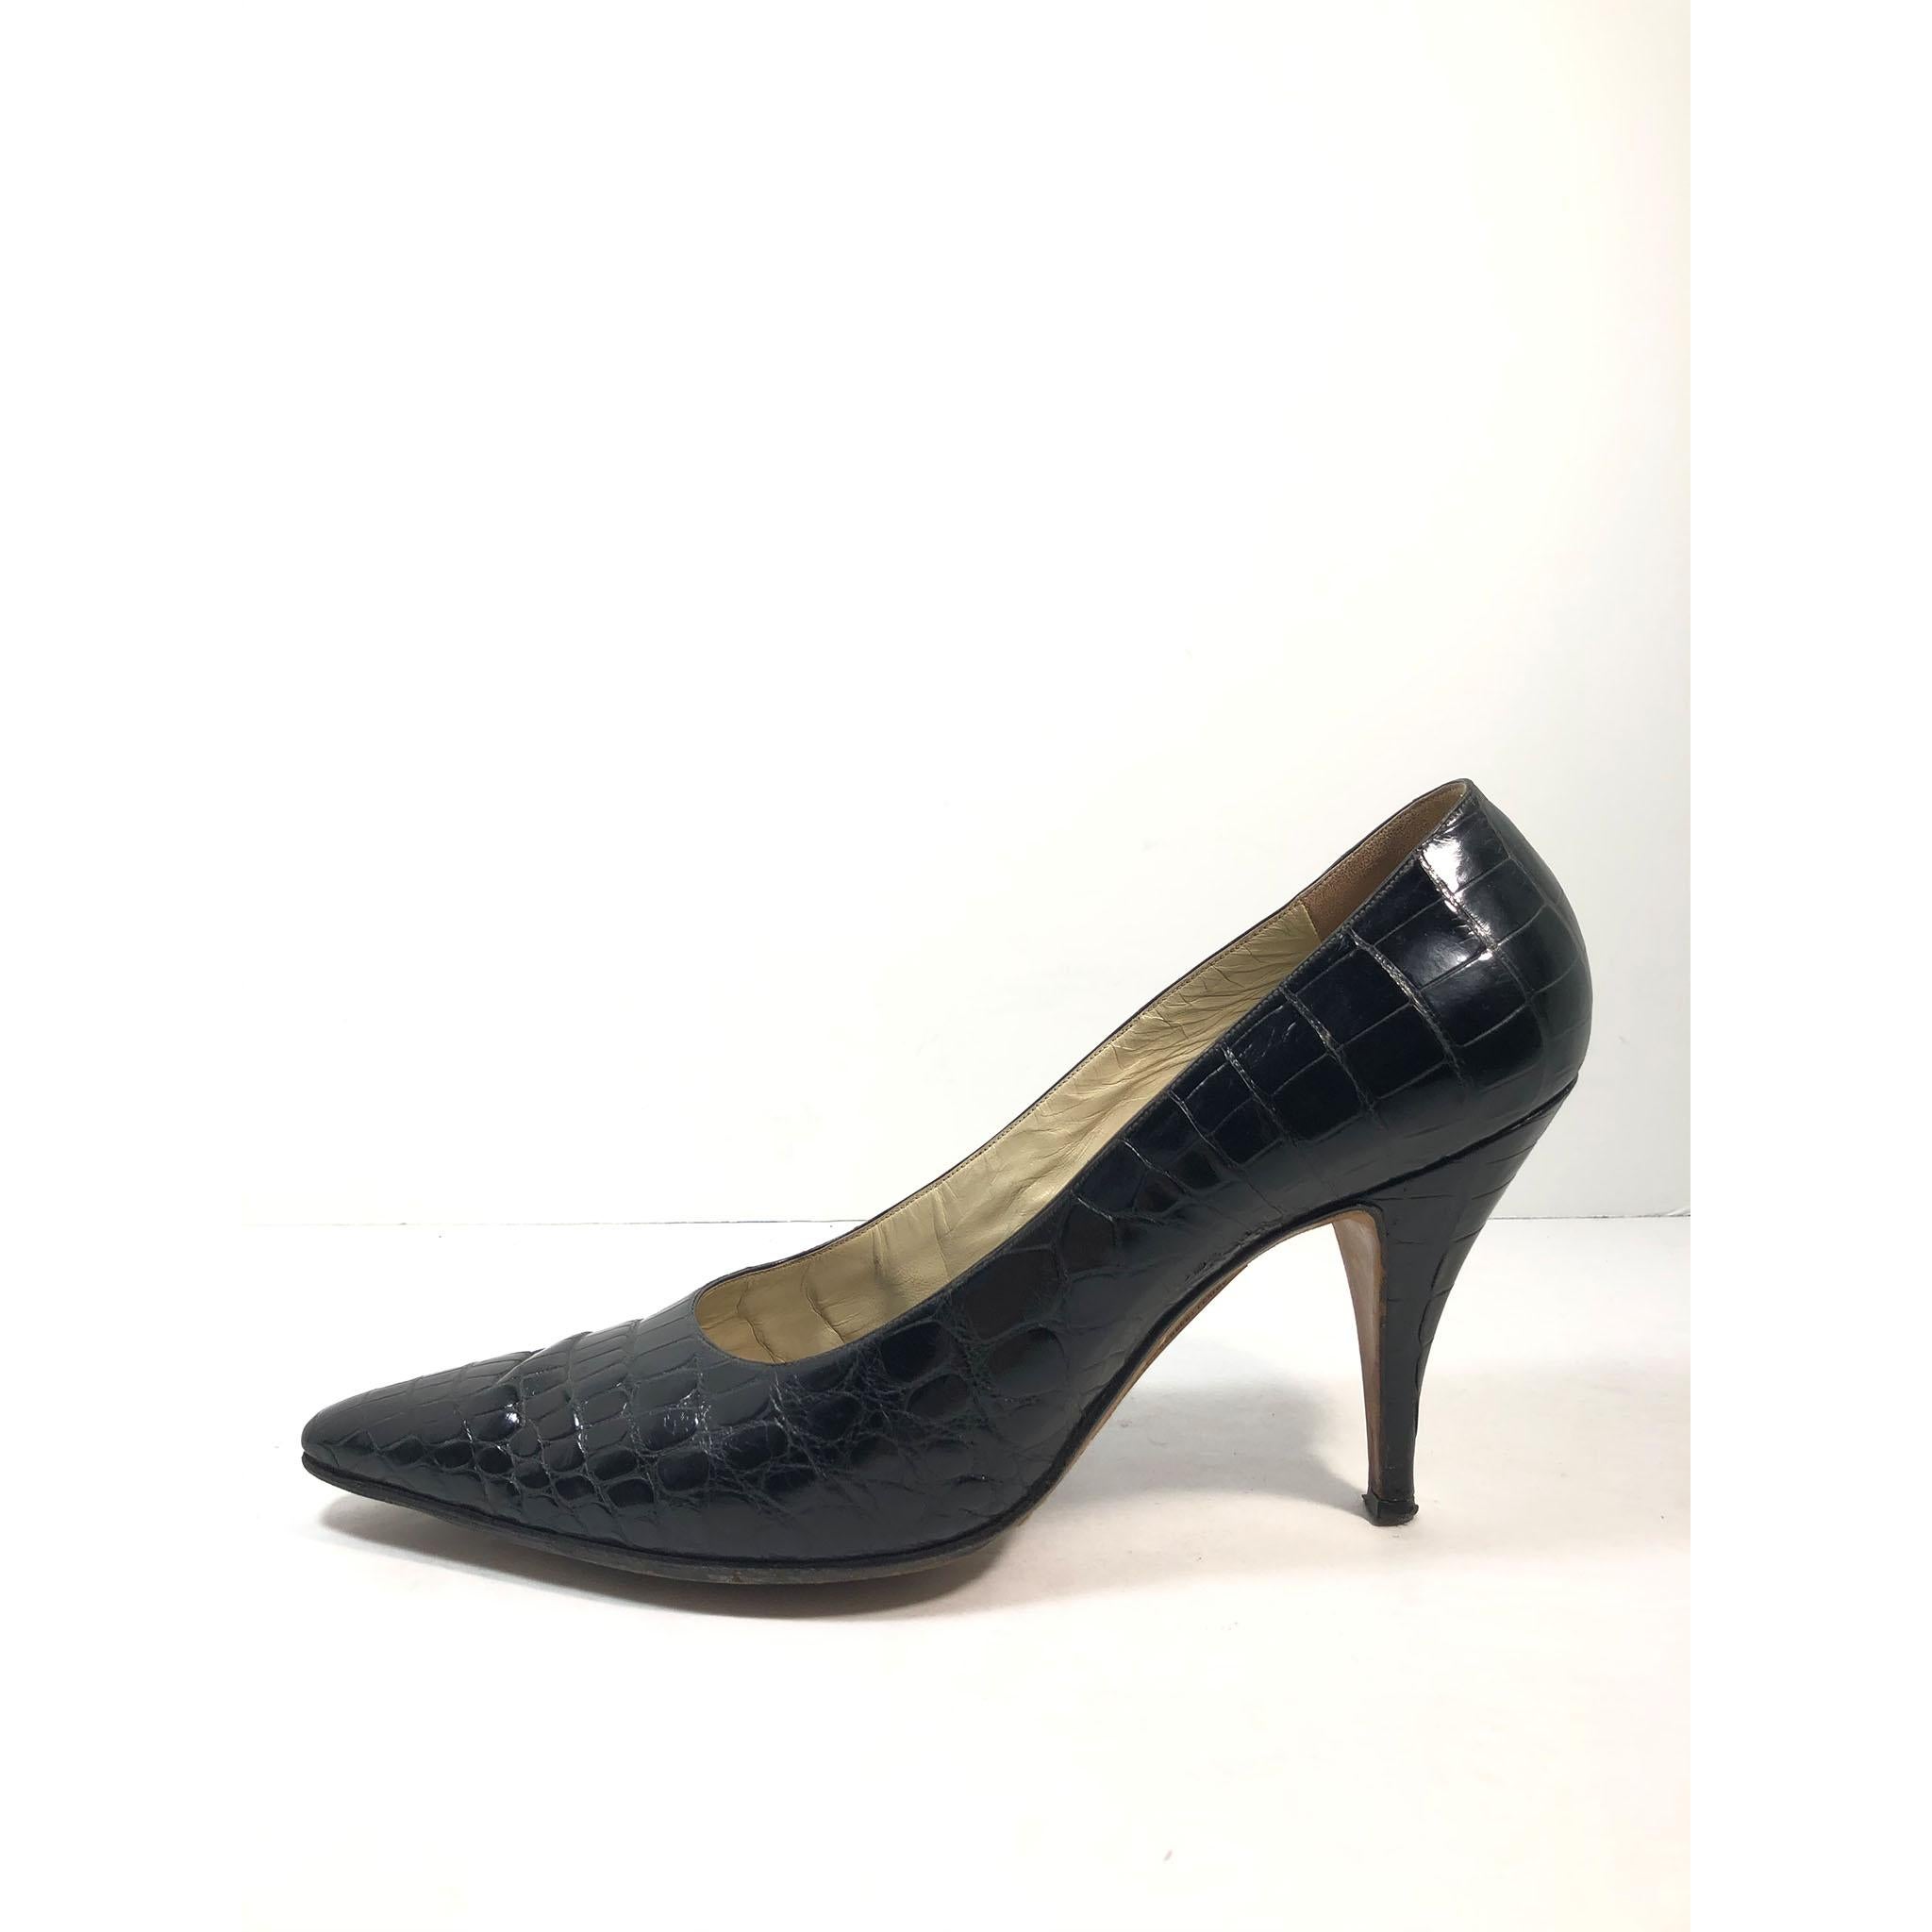 HERBERT LEVINE 1950's-1960's Black Shiny Alligator Pumps, leather heels perfect for any occasion. Size 8. 

If you have any questions please contact us.  